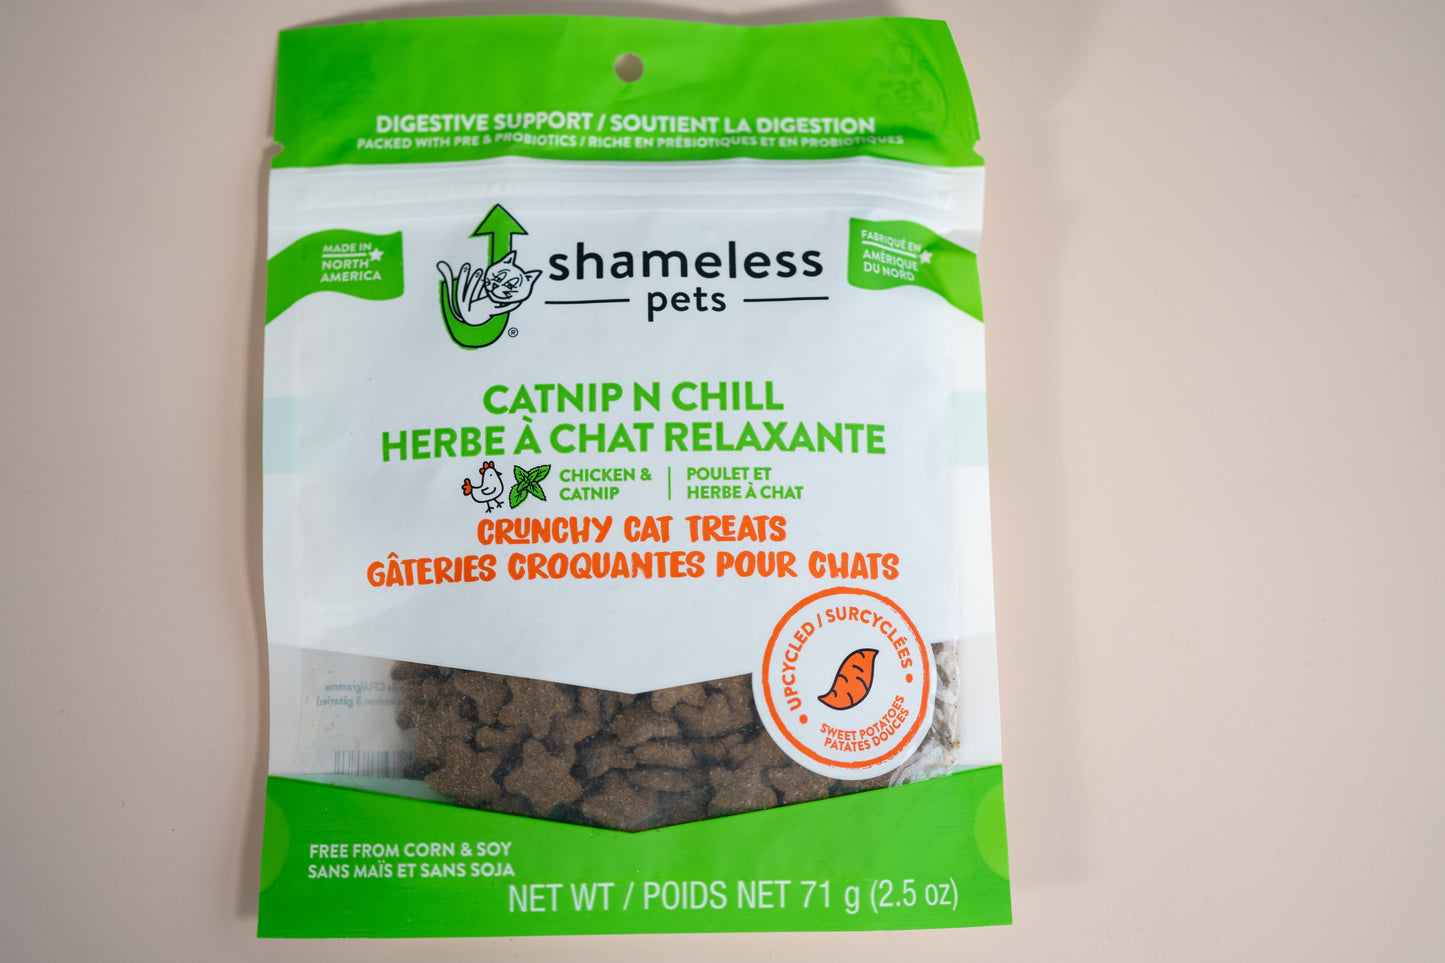 Shameless Pets Catnip N Chill are packed with pre and probiotics for a digestive support.